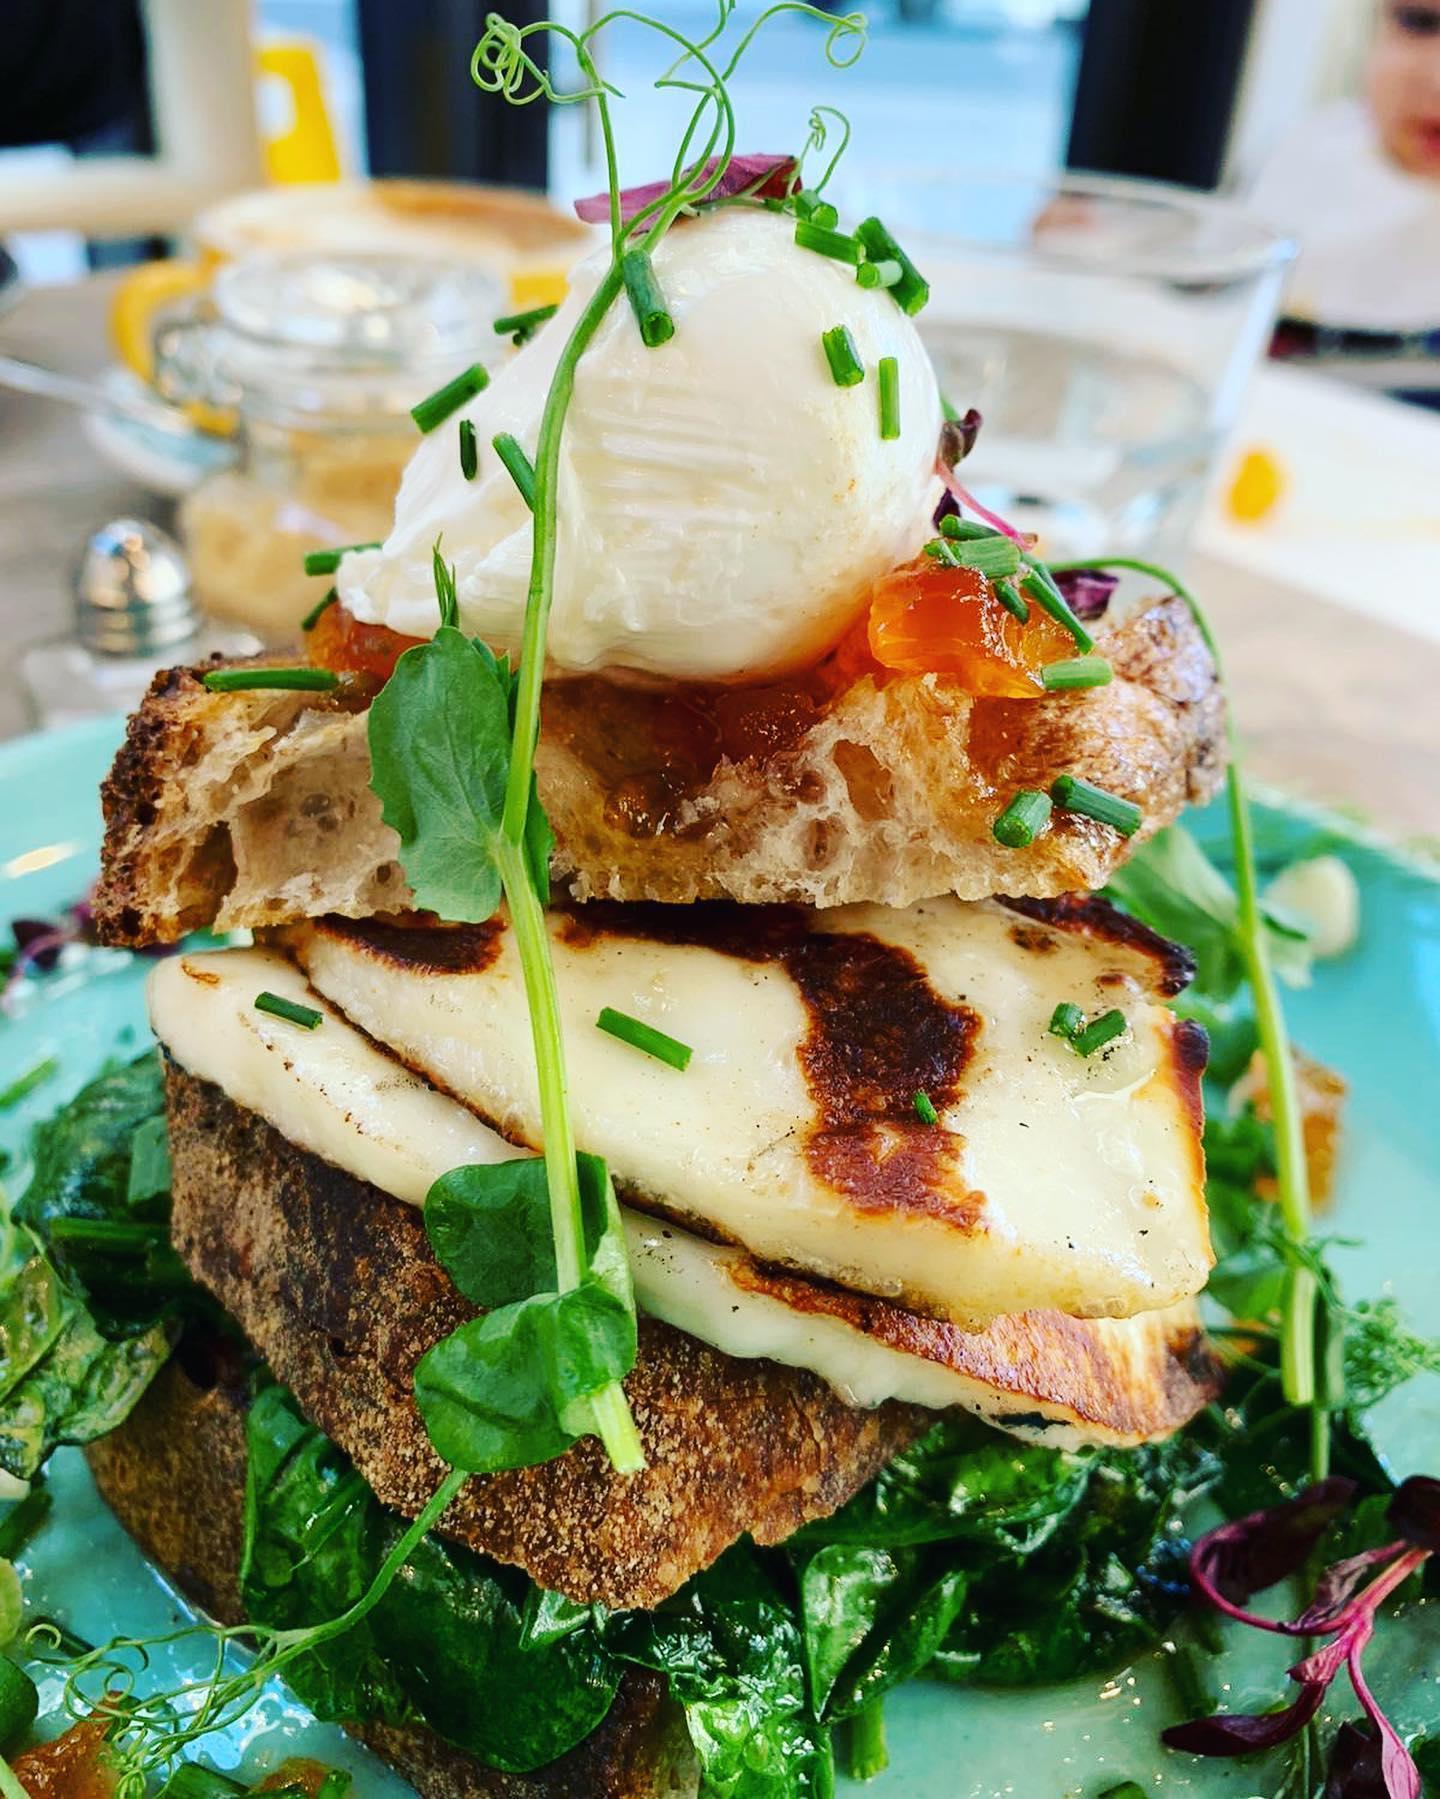 Delicious looking all in one brunch sandwich